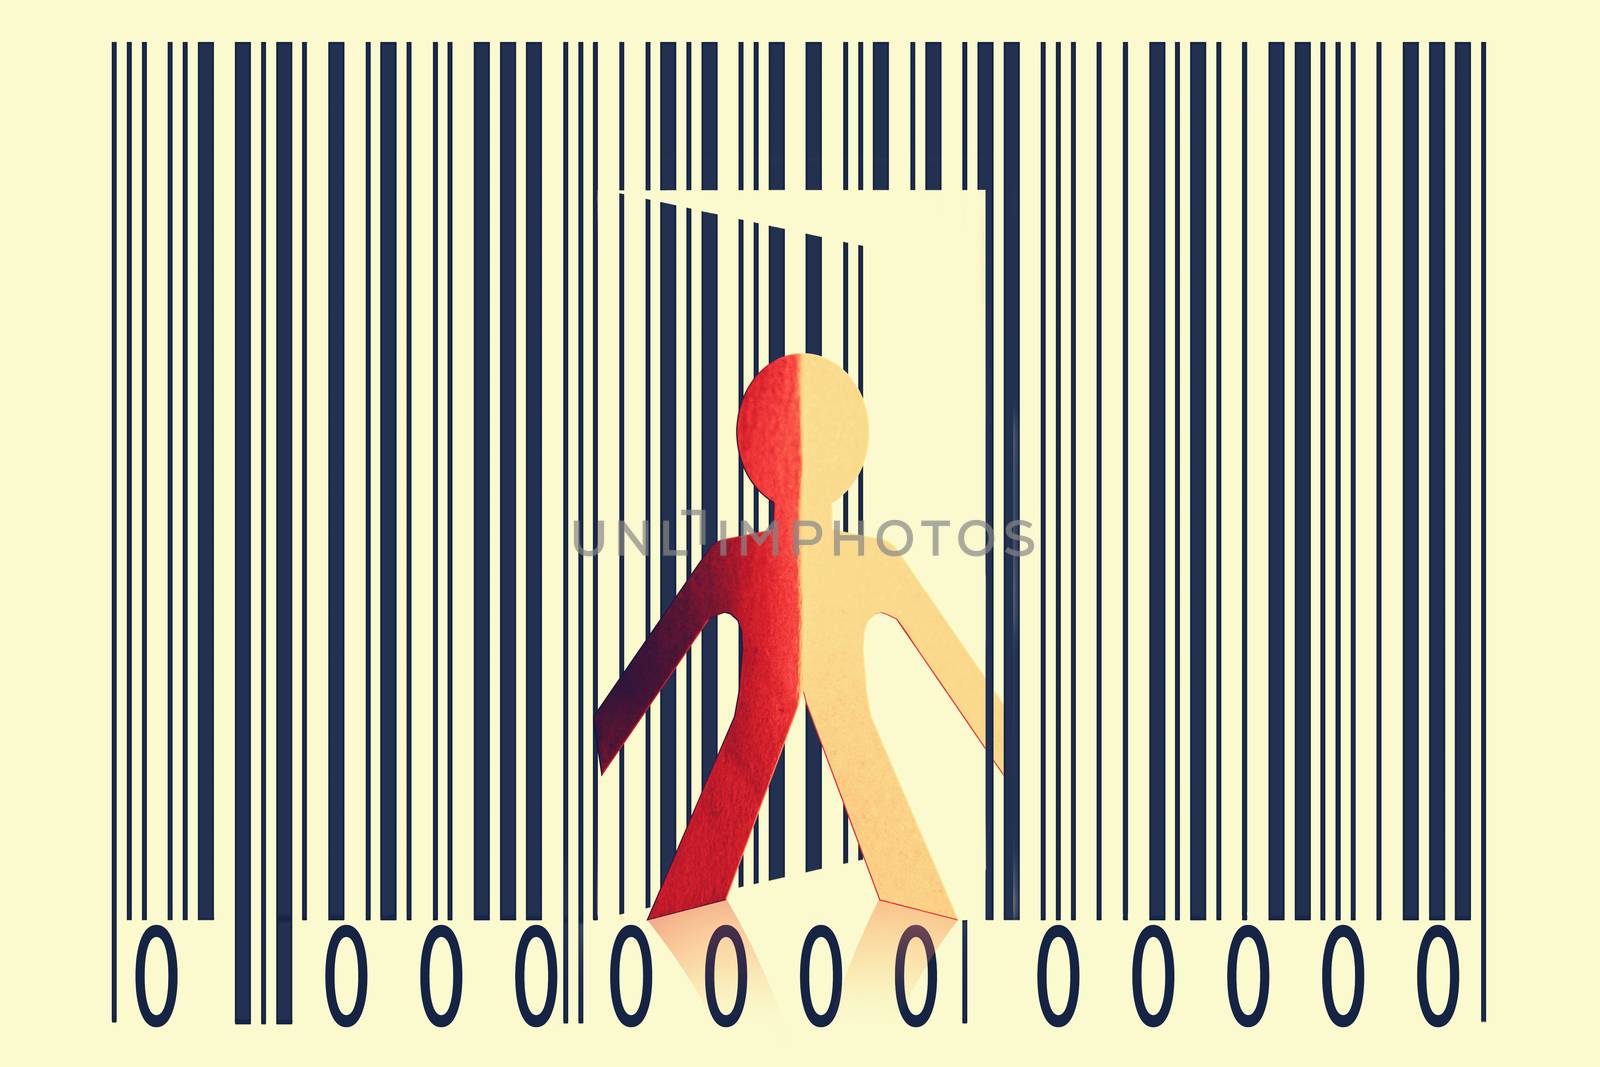 Paperman coming out of a bar code to go out by yands